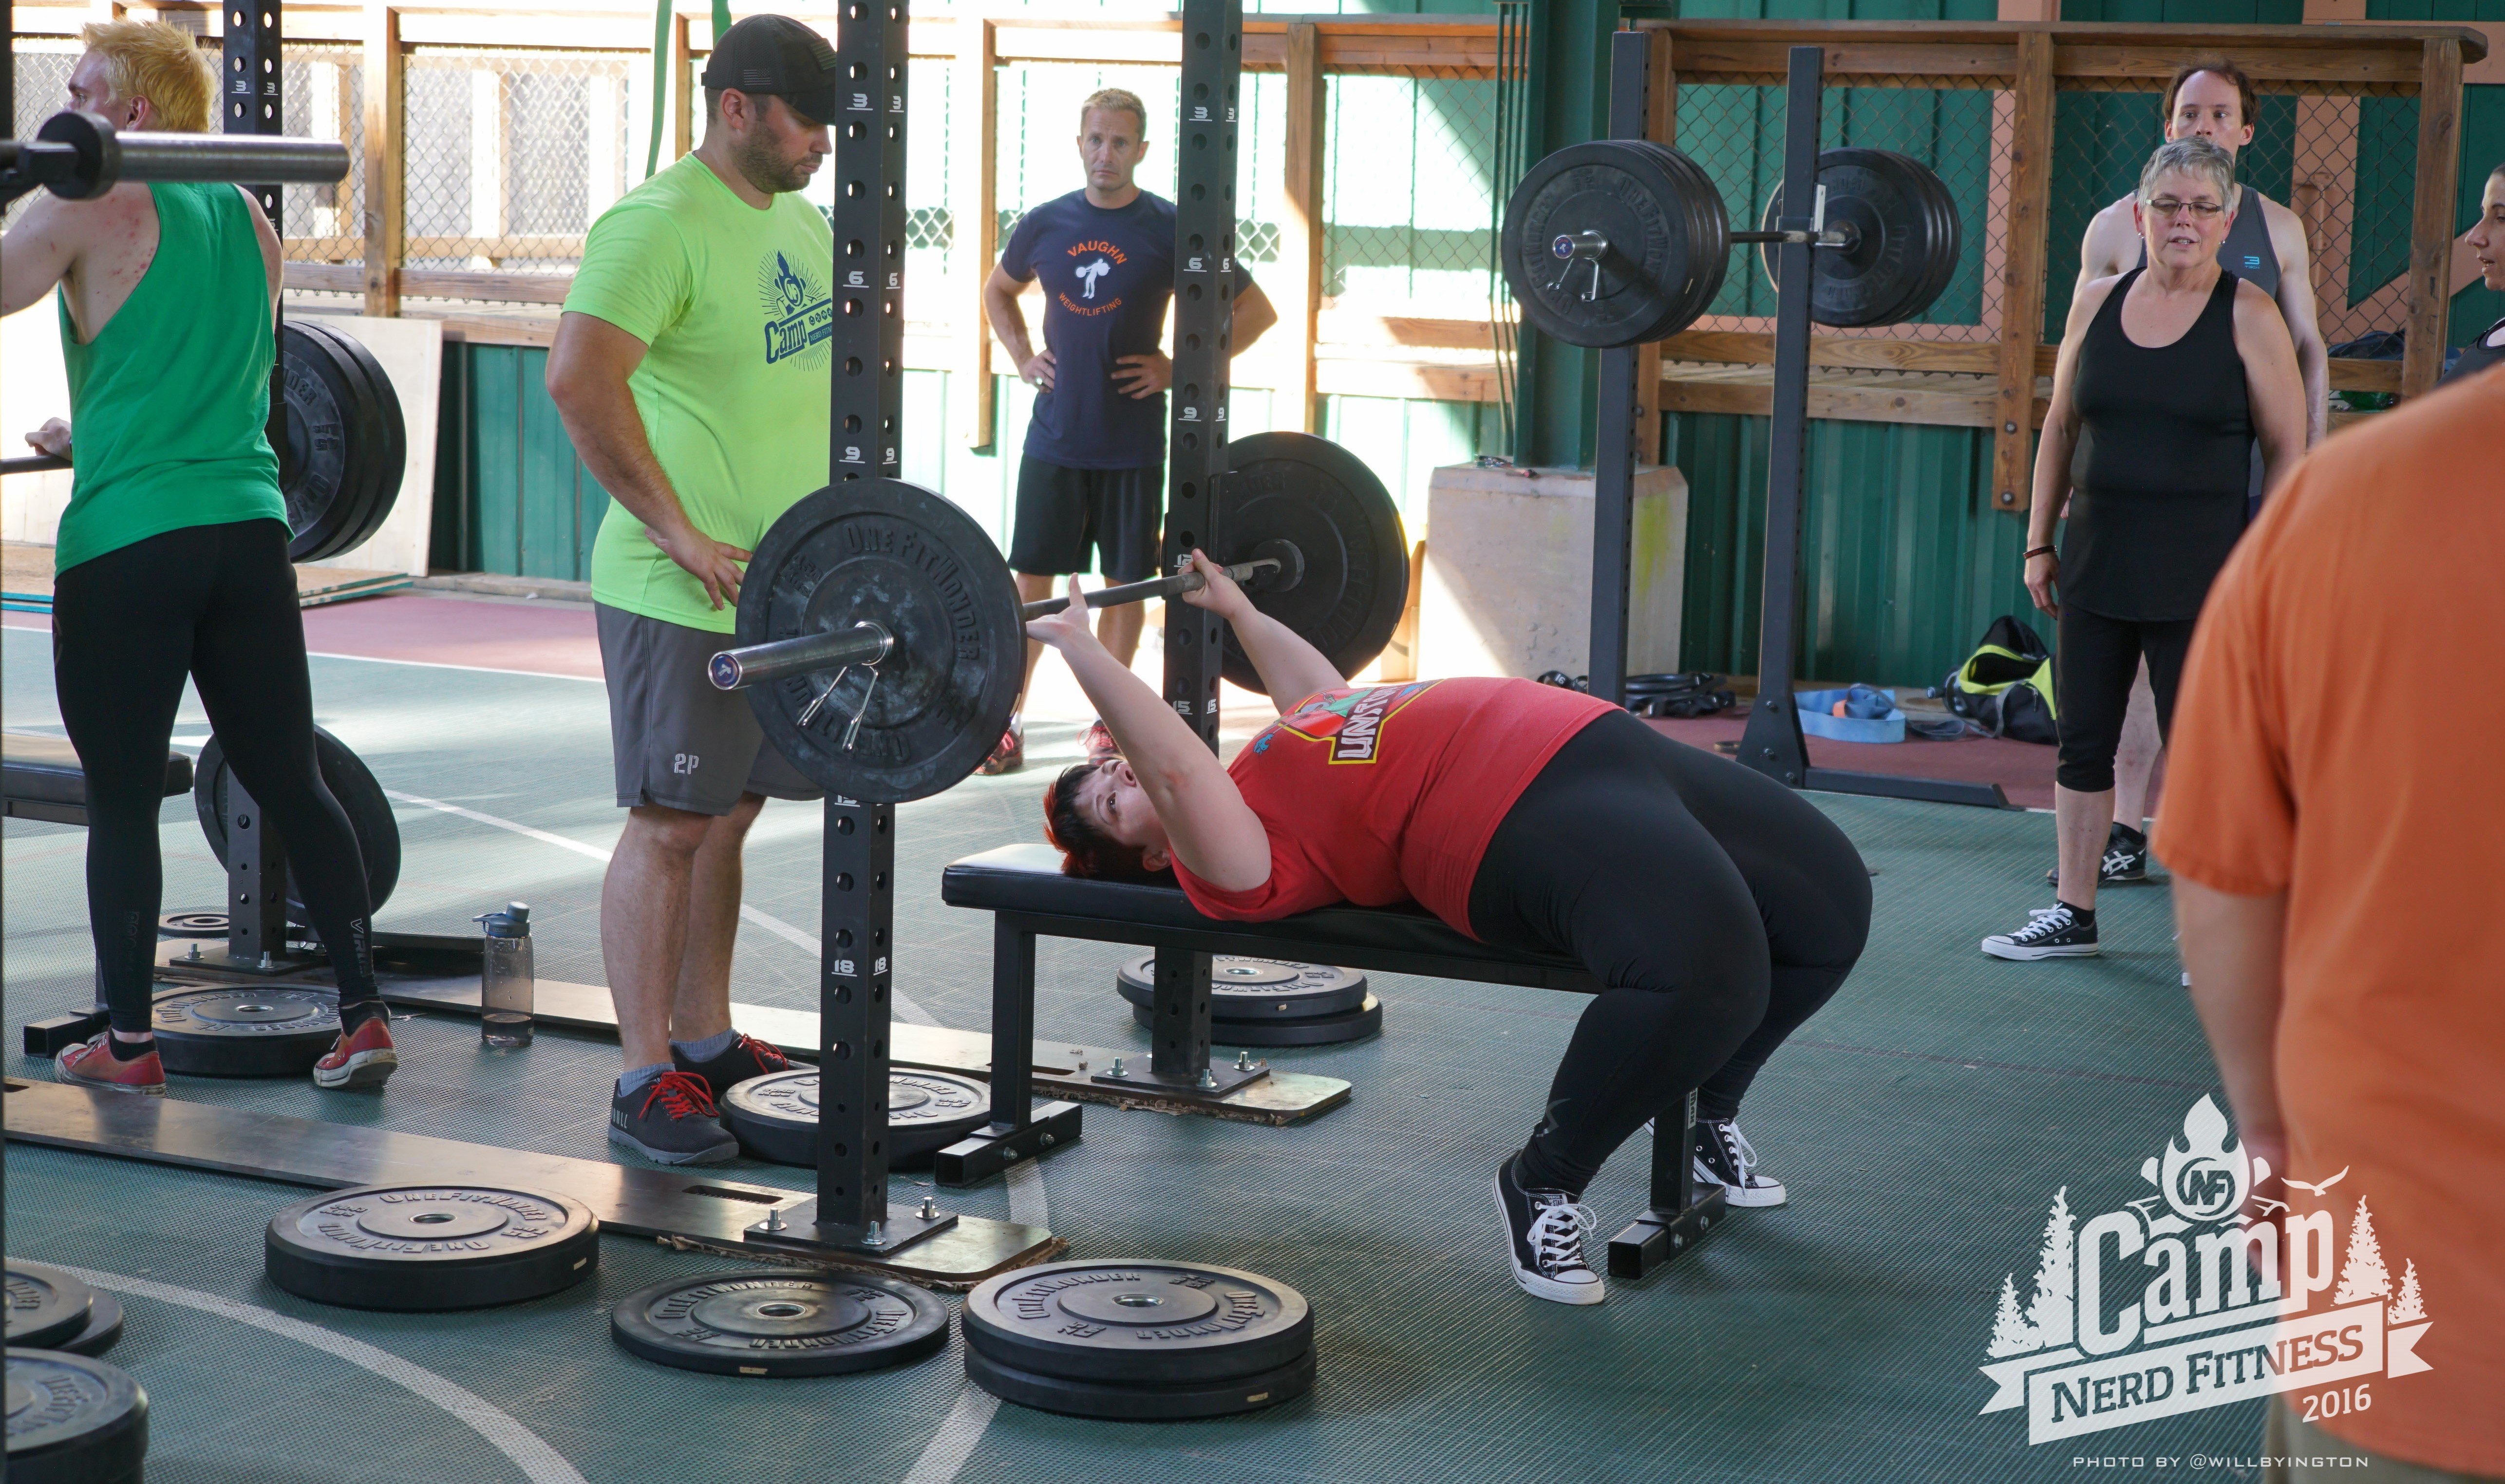 As we will teach, having a spotter can be critical when using the bench press.